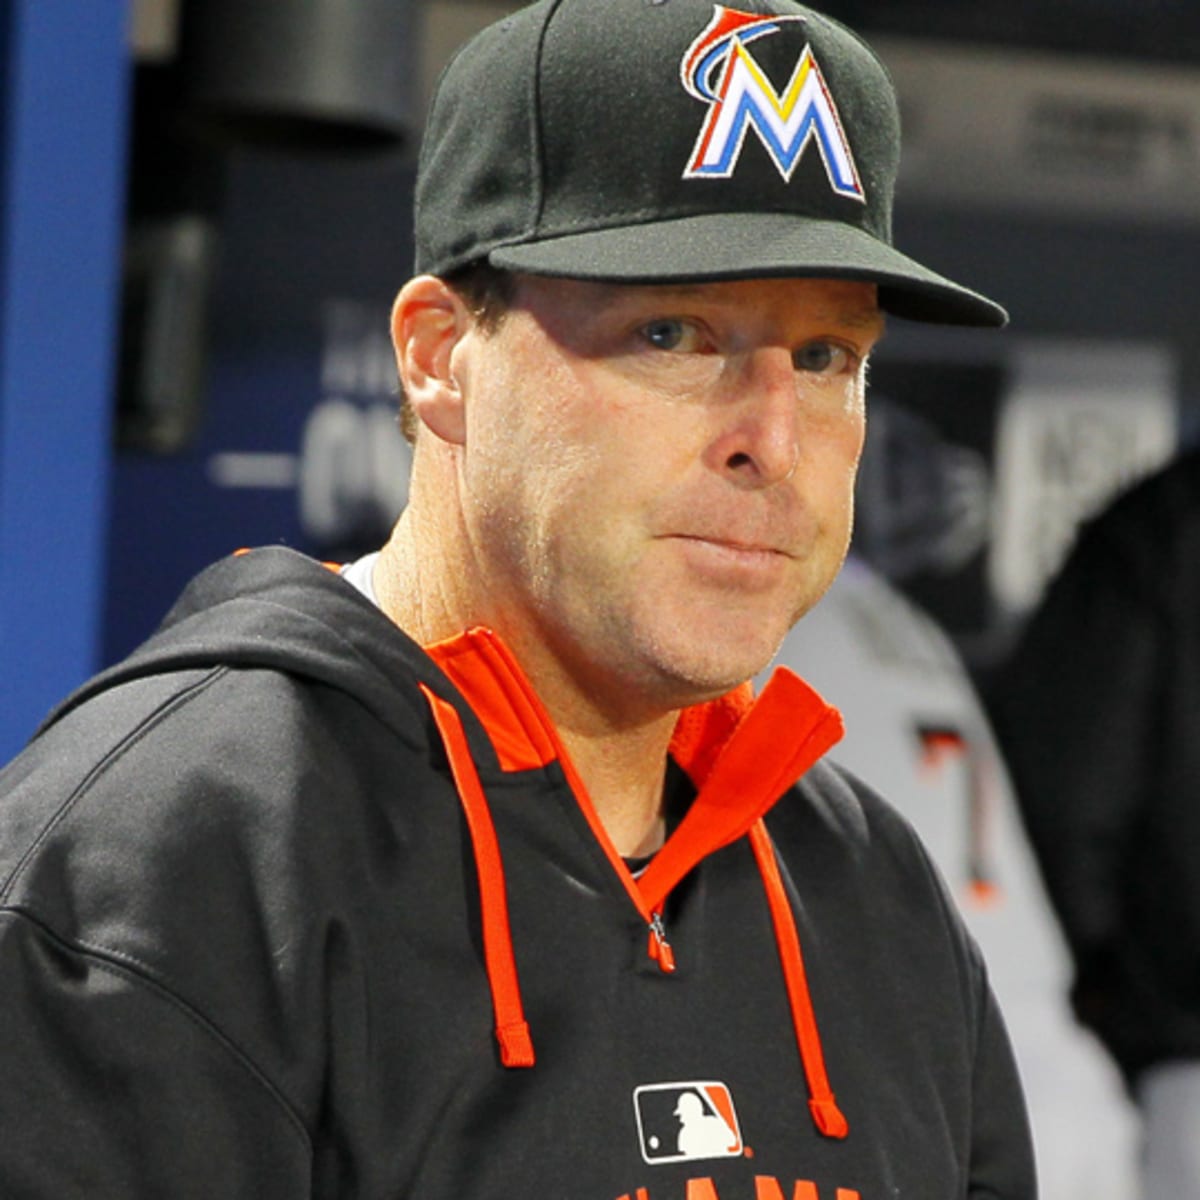 Miami Marlins: Manager Jack McKeon stands above all other skippers